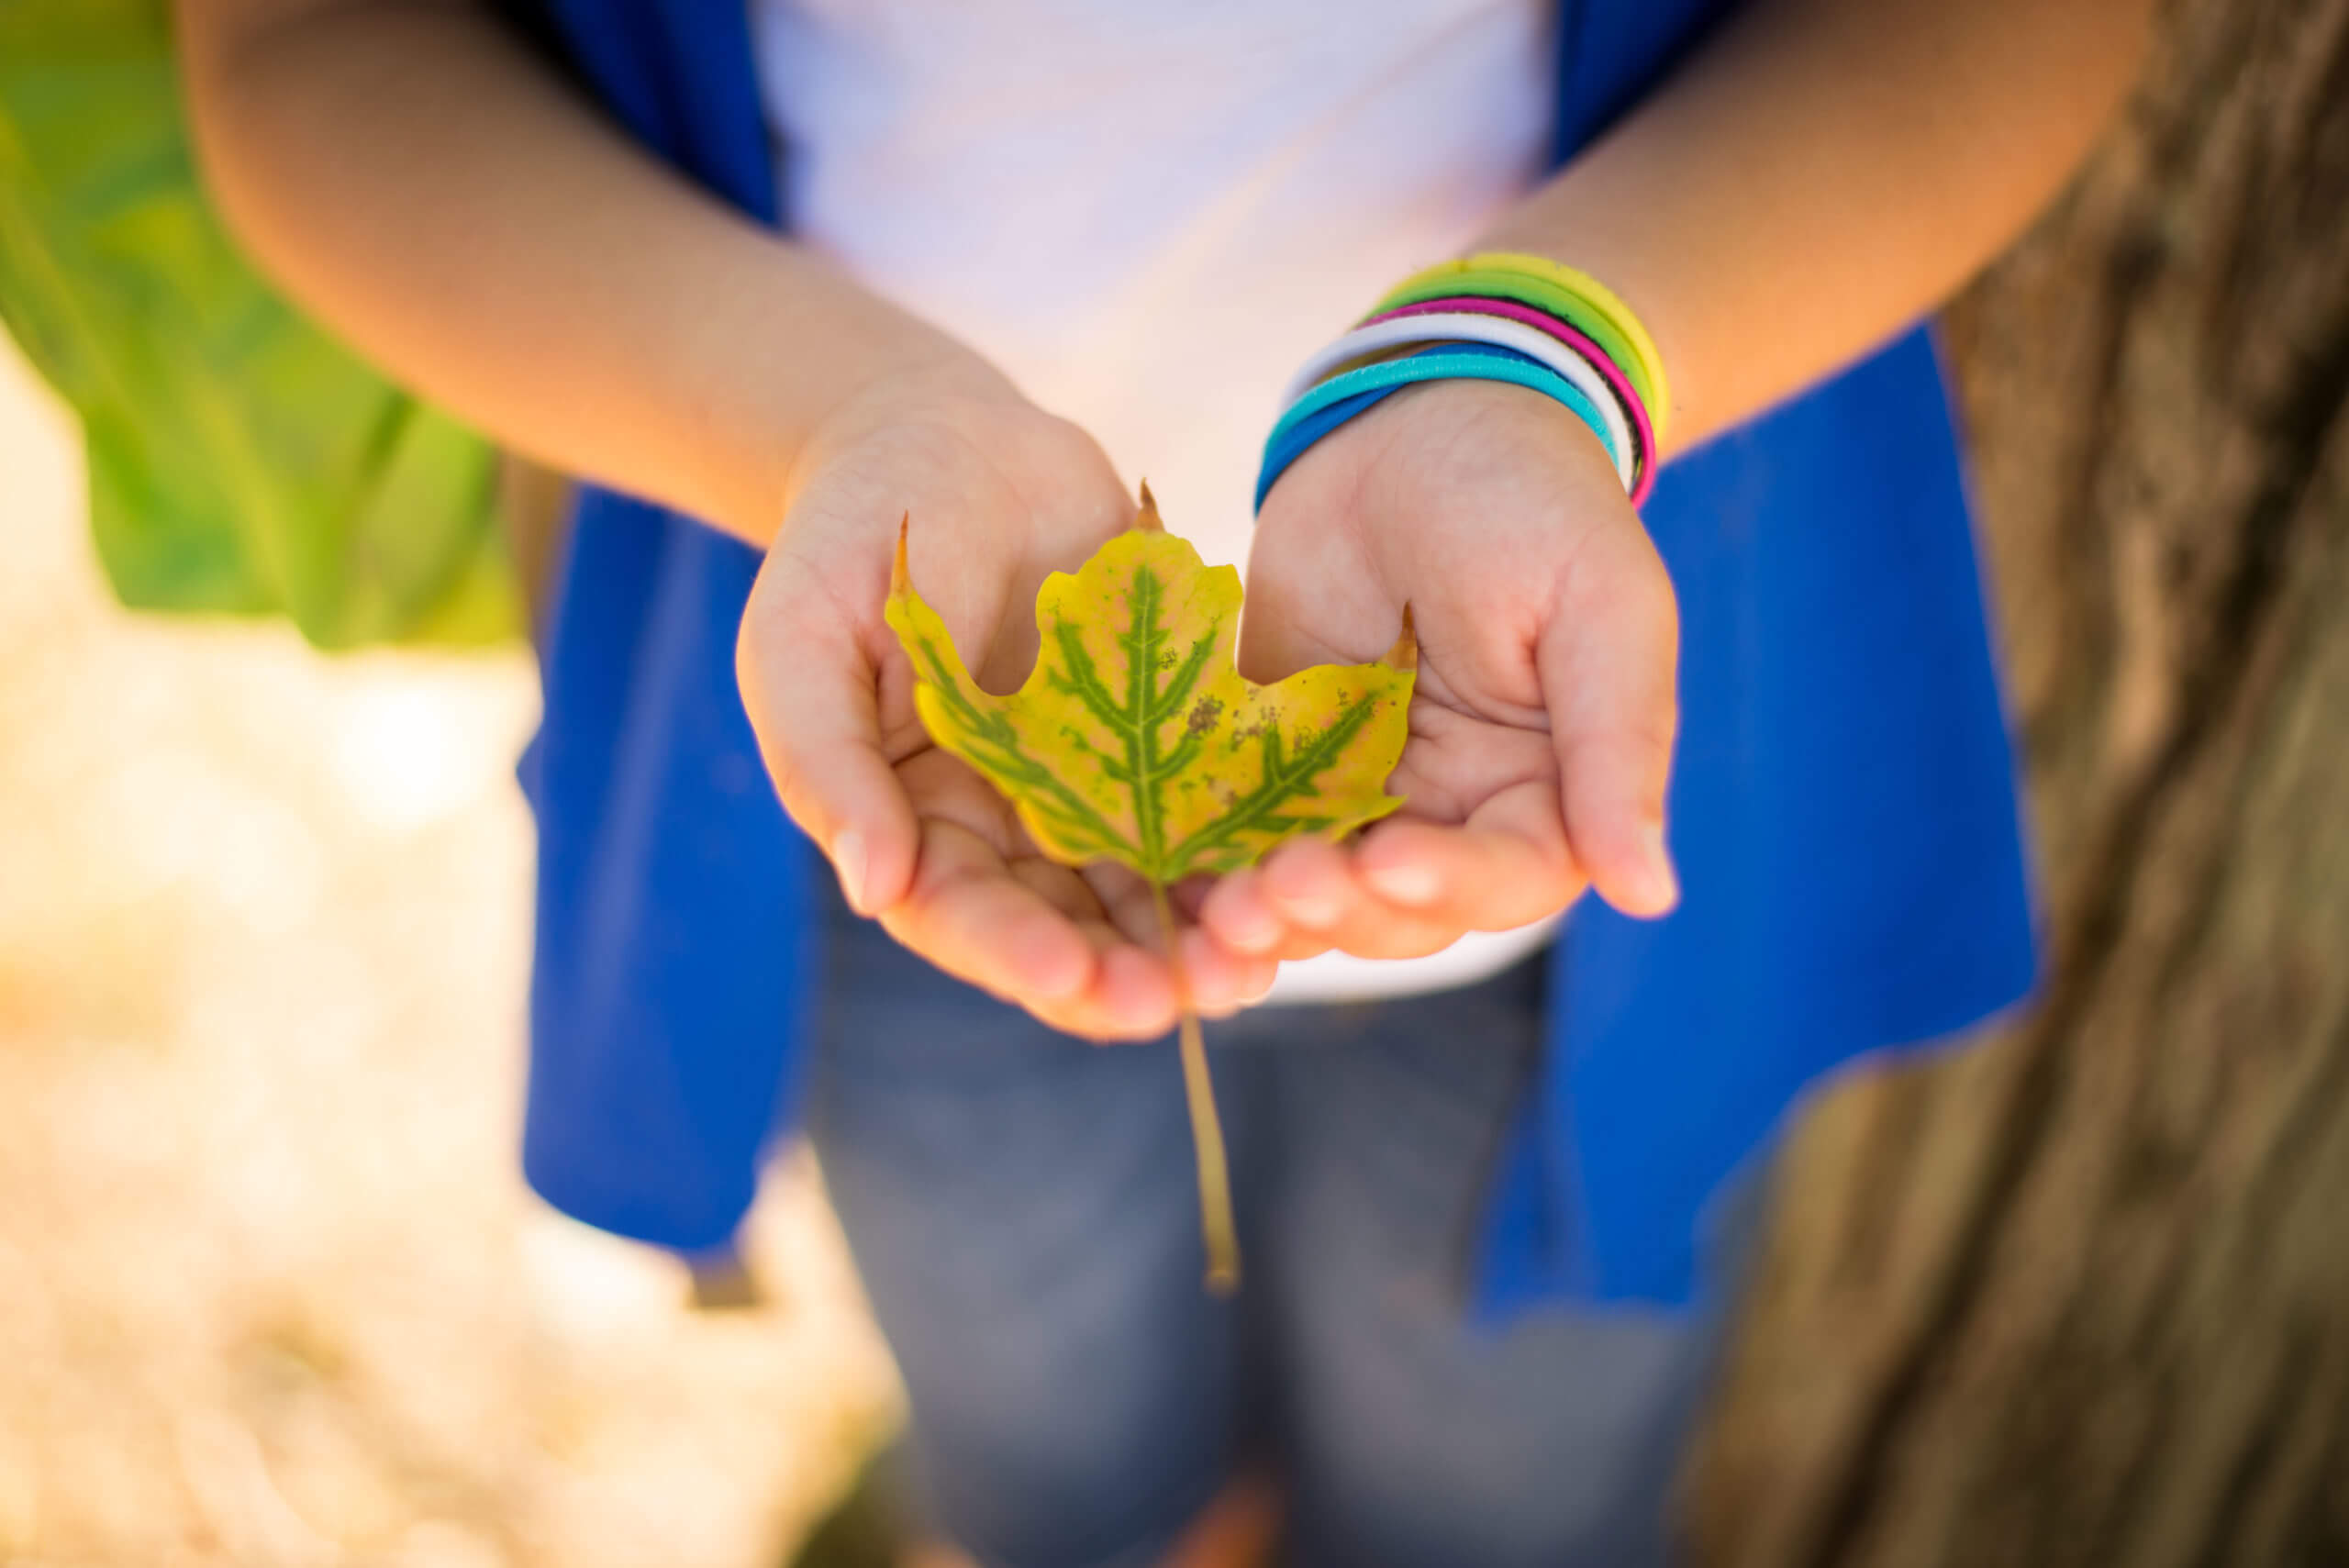 A child holds a colorful maple leaf in their open hands.